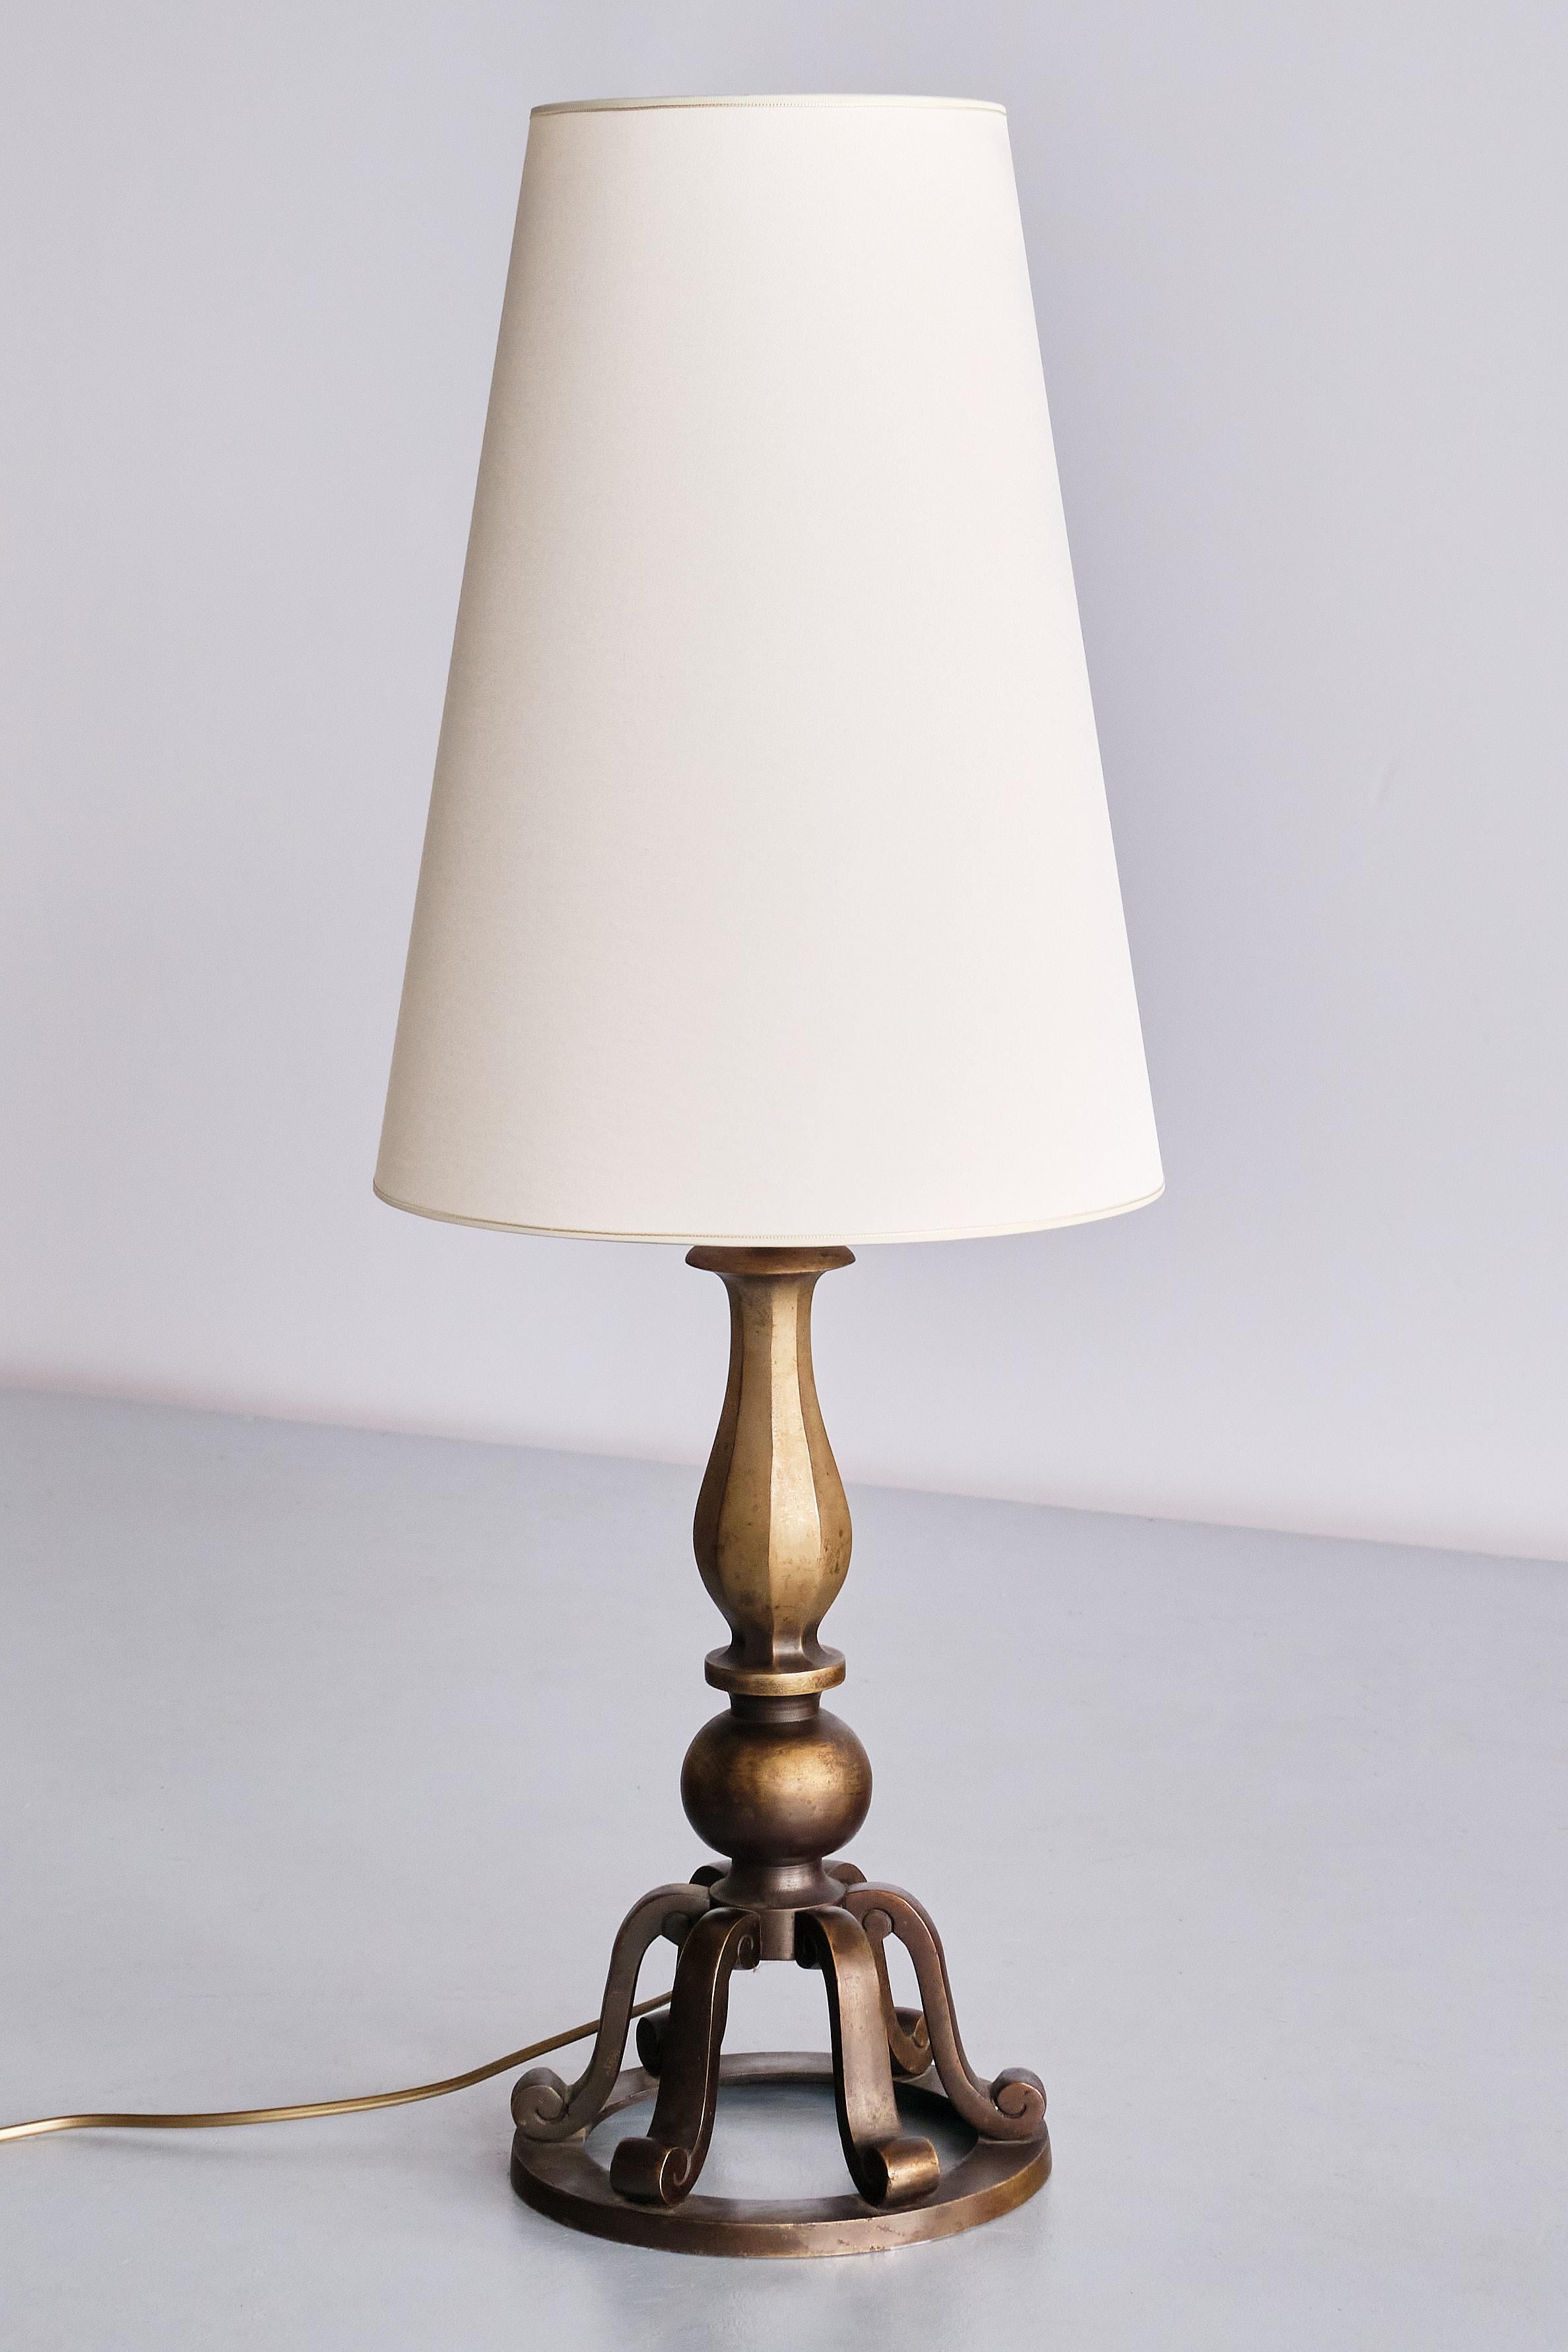 Swedish Grace Brass Table Lamp by C.G. Hallberg, Sweden, Early 1930s For Sale 5